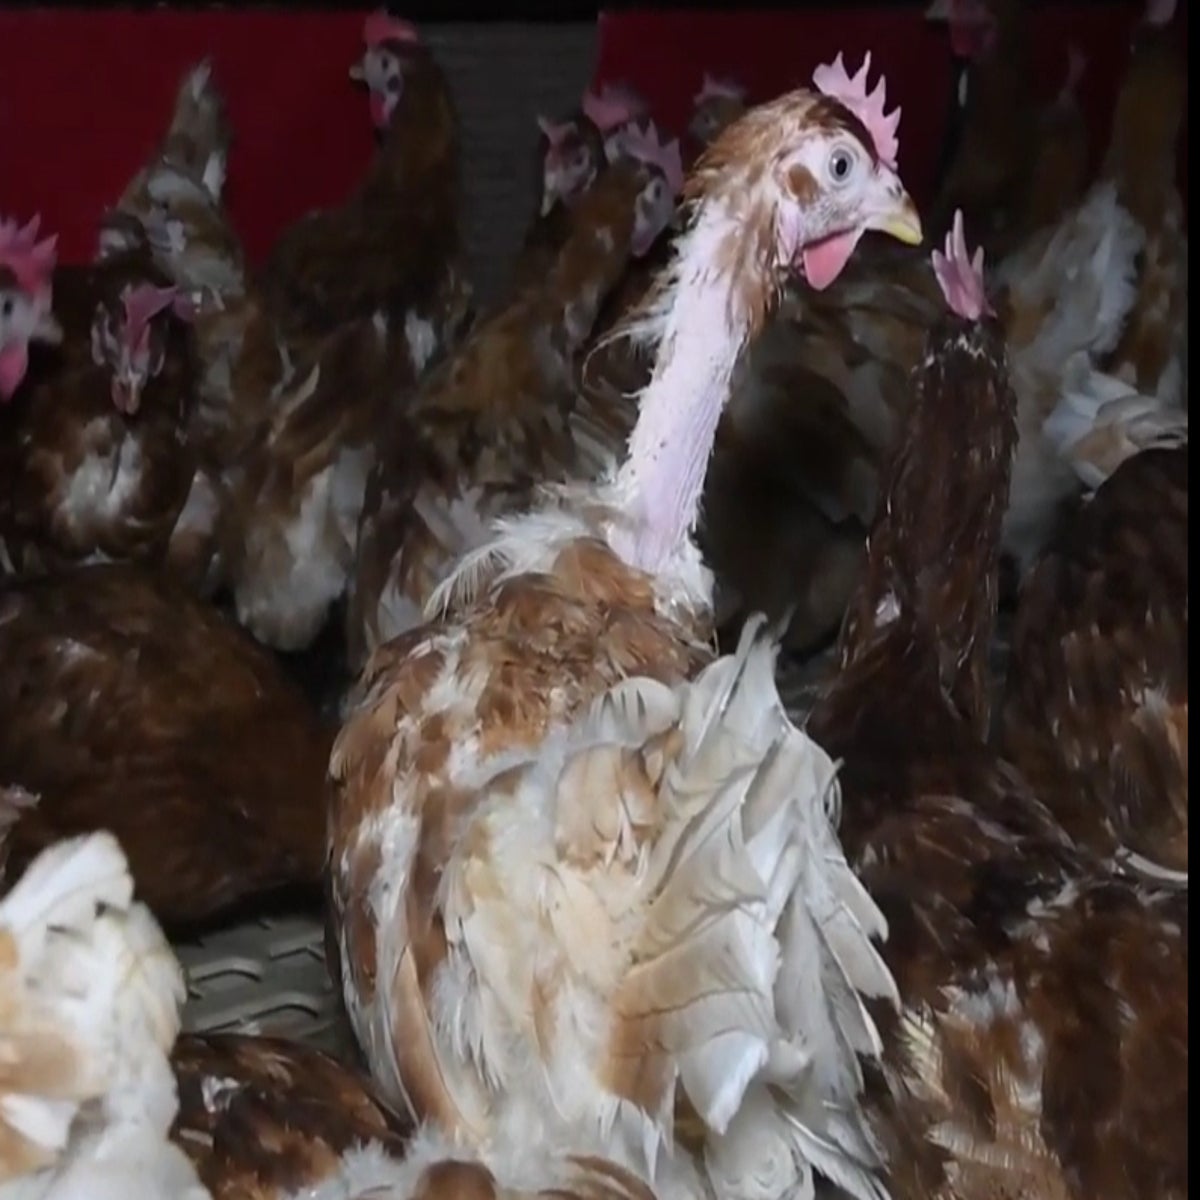 Free-range' hens from Happy Egg suppliers suffer misery in overcrowded  sheds, investigators claim